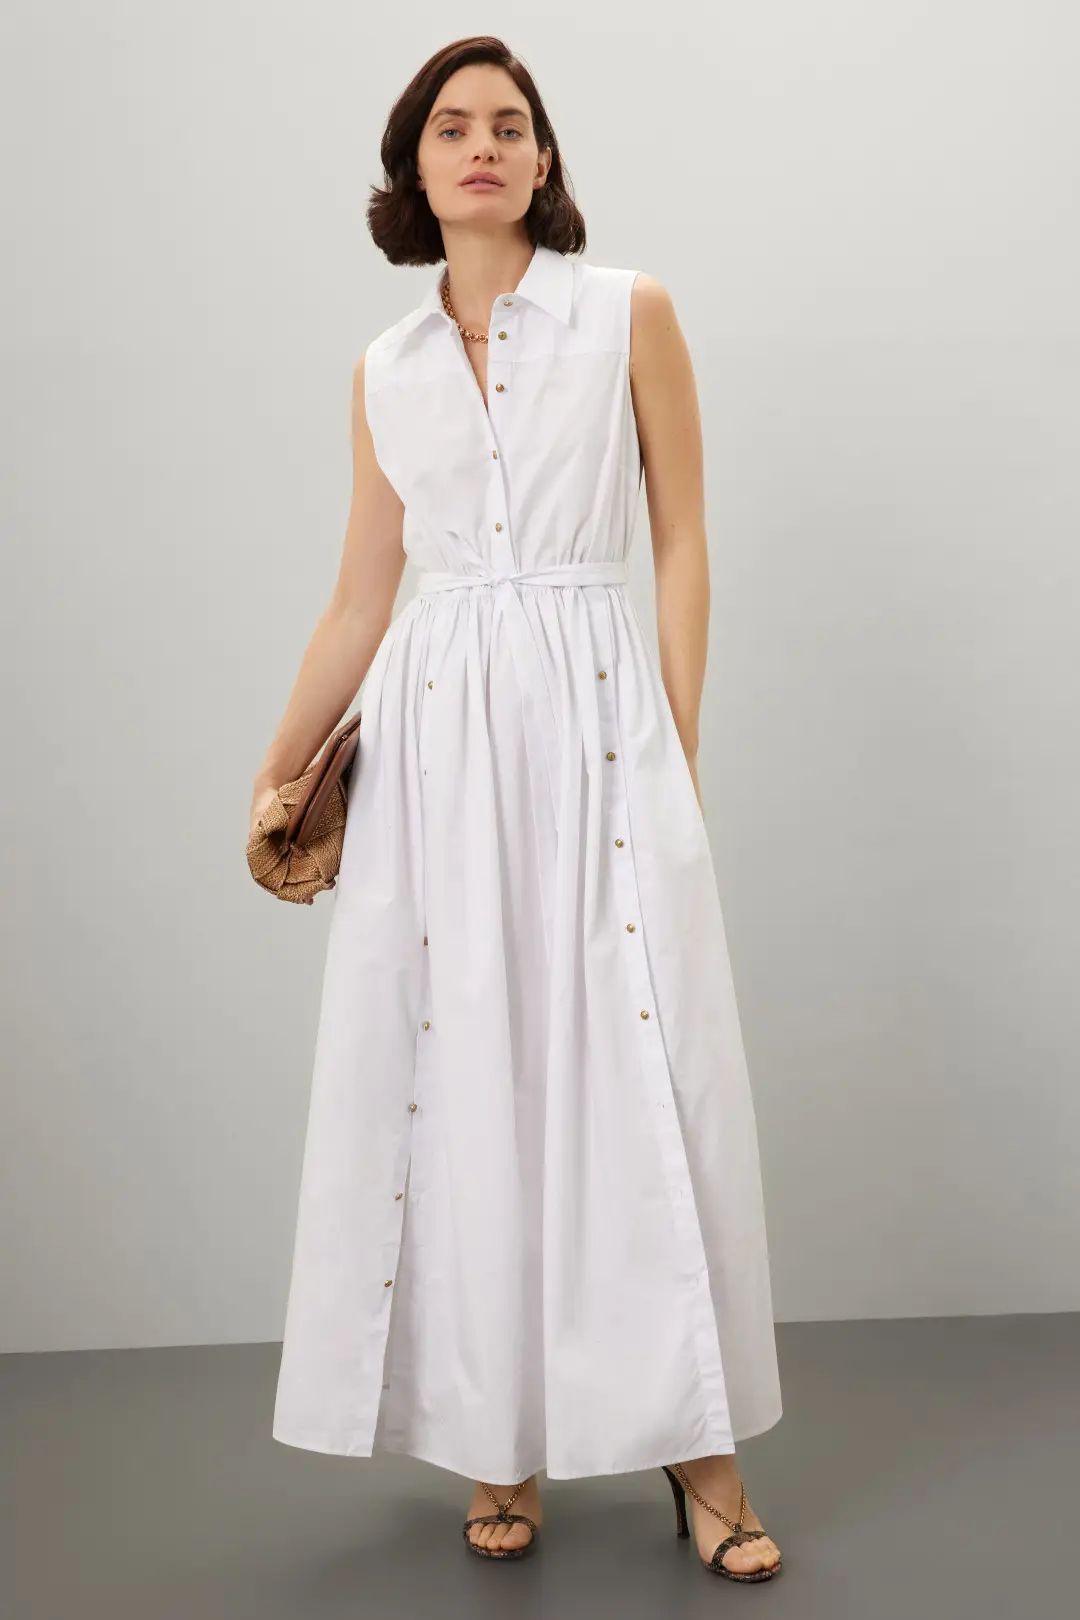 White Buttoned Dress | Rent the Runway